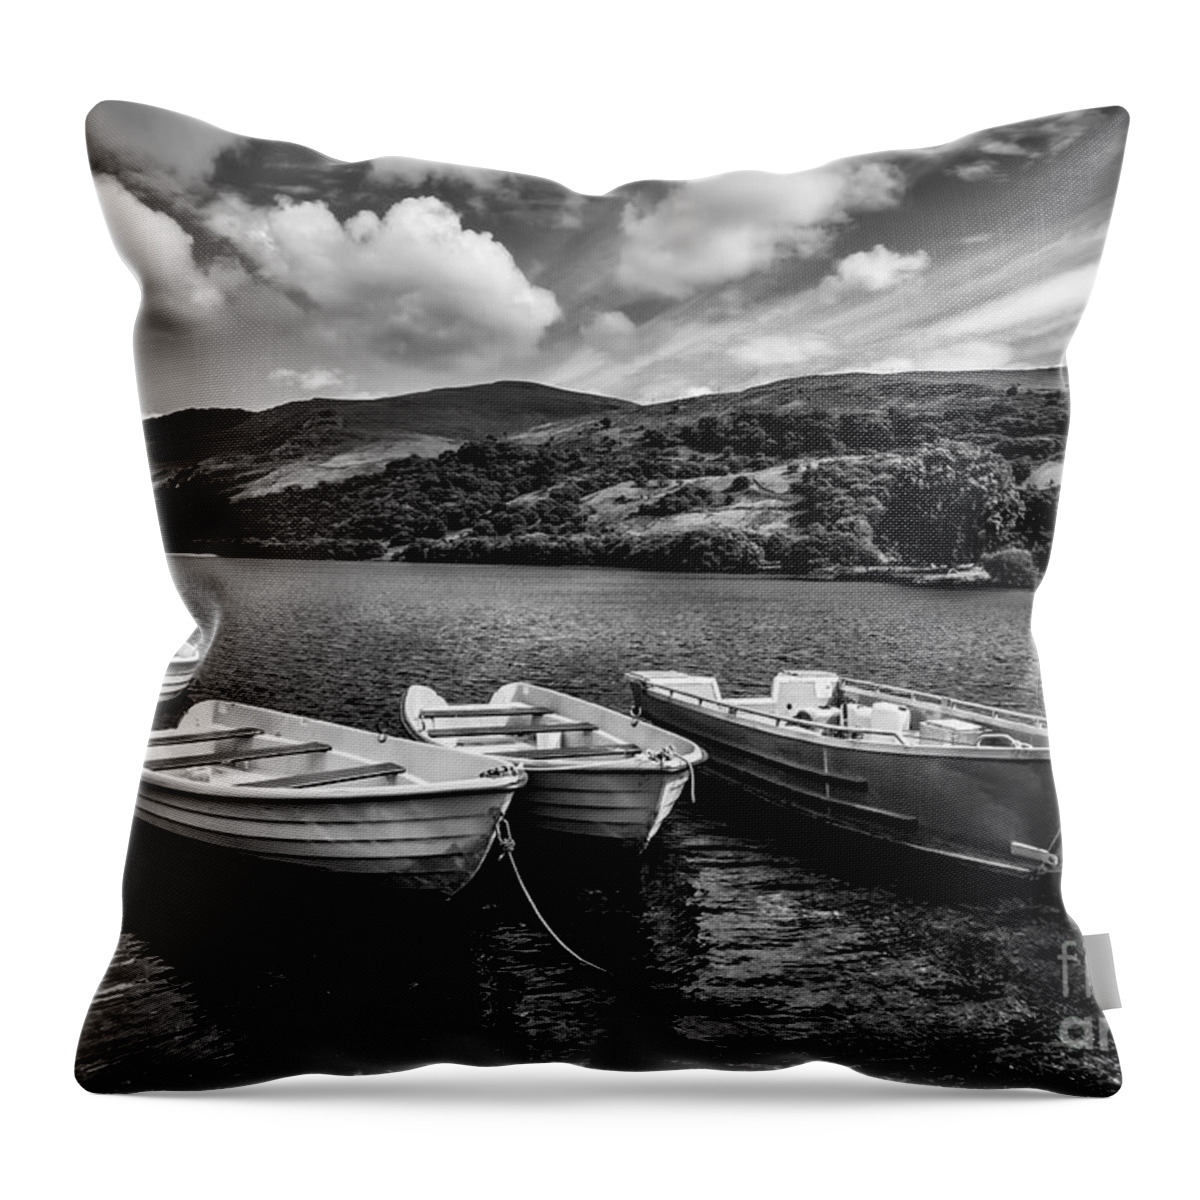 Llanllyfni Throw Pillow featuring the photograph Nantlle Uchaf Boats by Adrian Evans